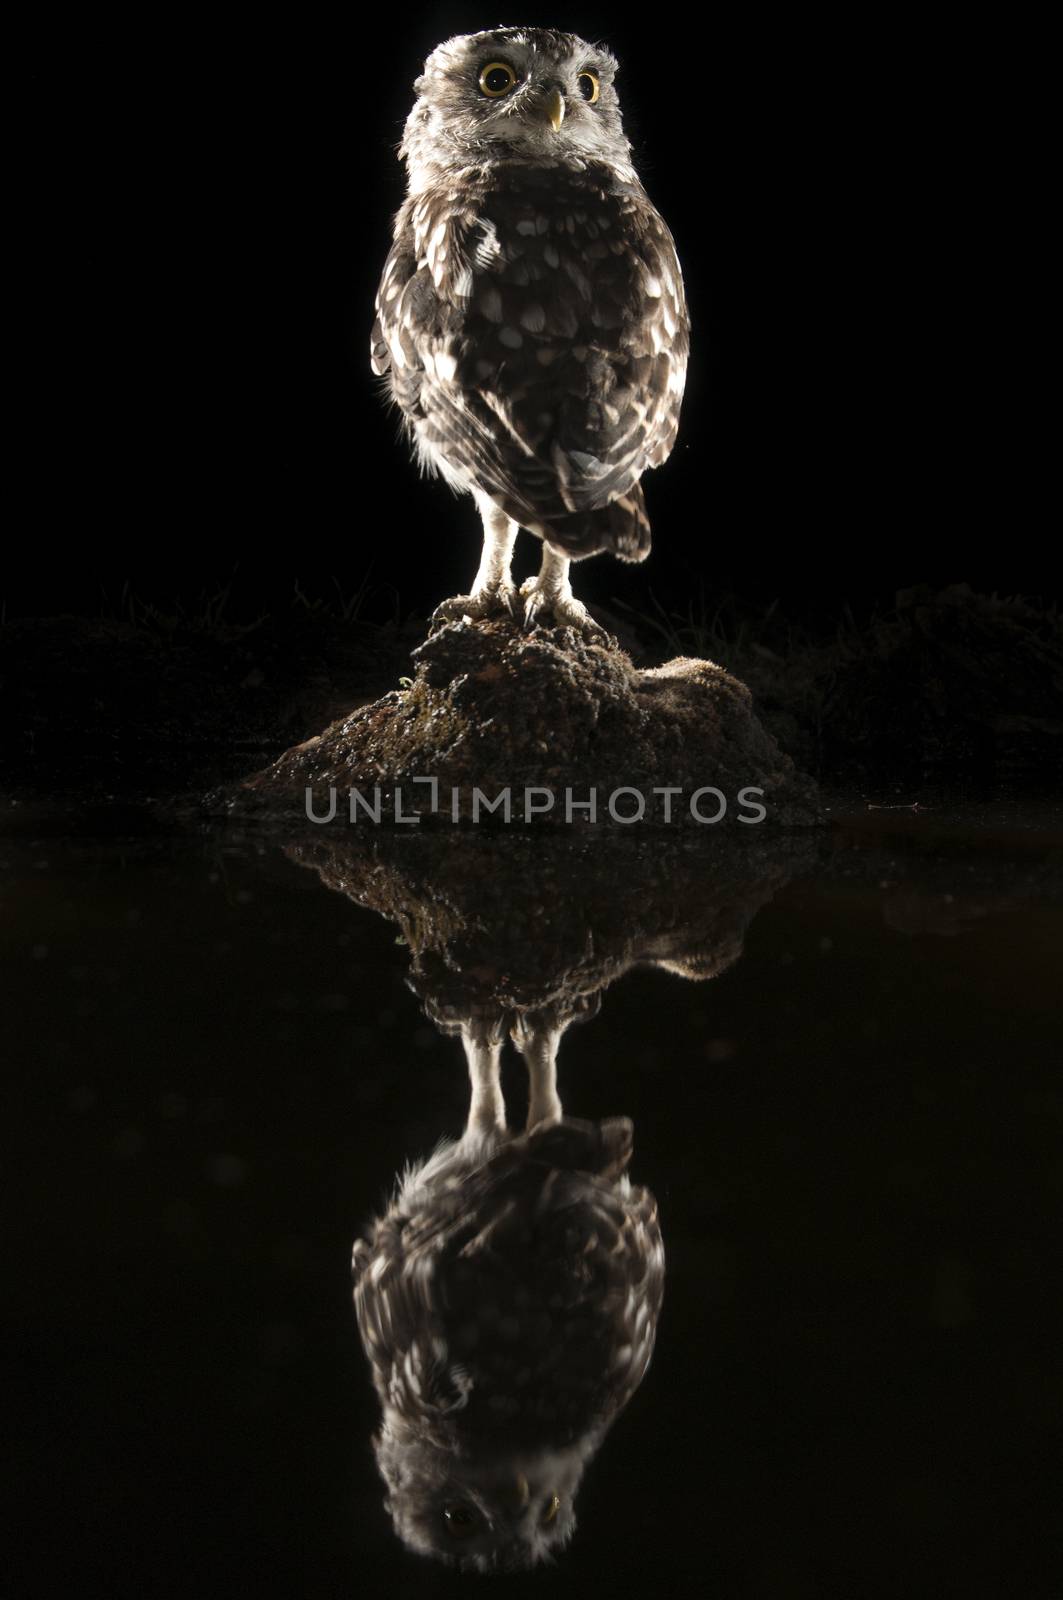 Athene noctua owl, perched on a rock at night, with reflection i by jalonsohu@gmail.com